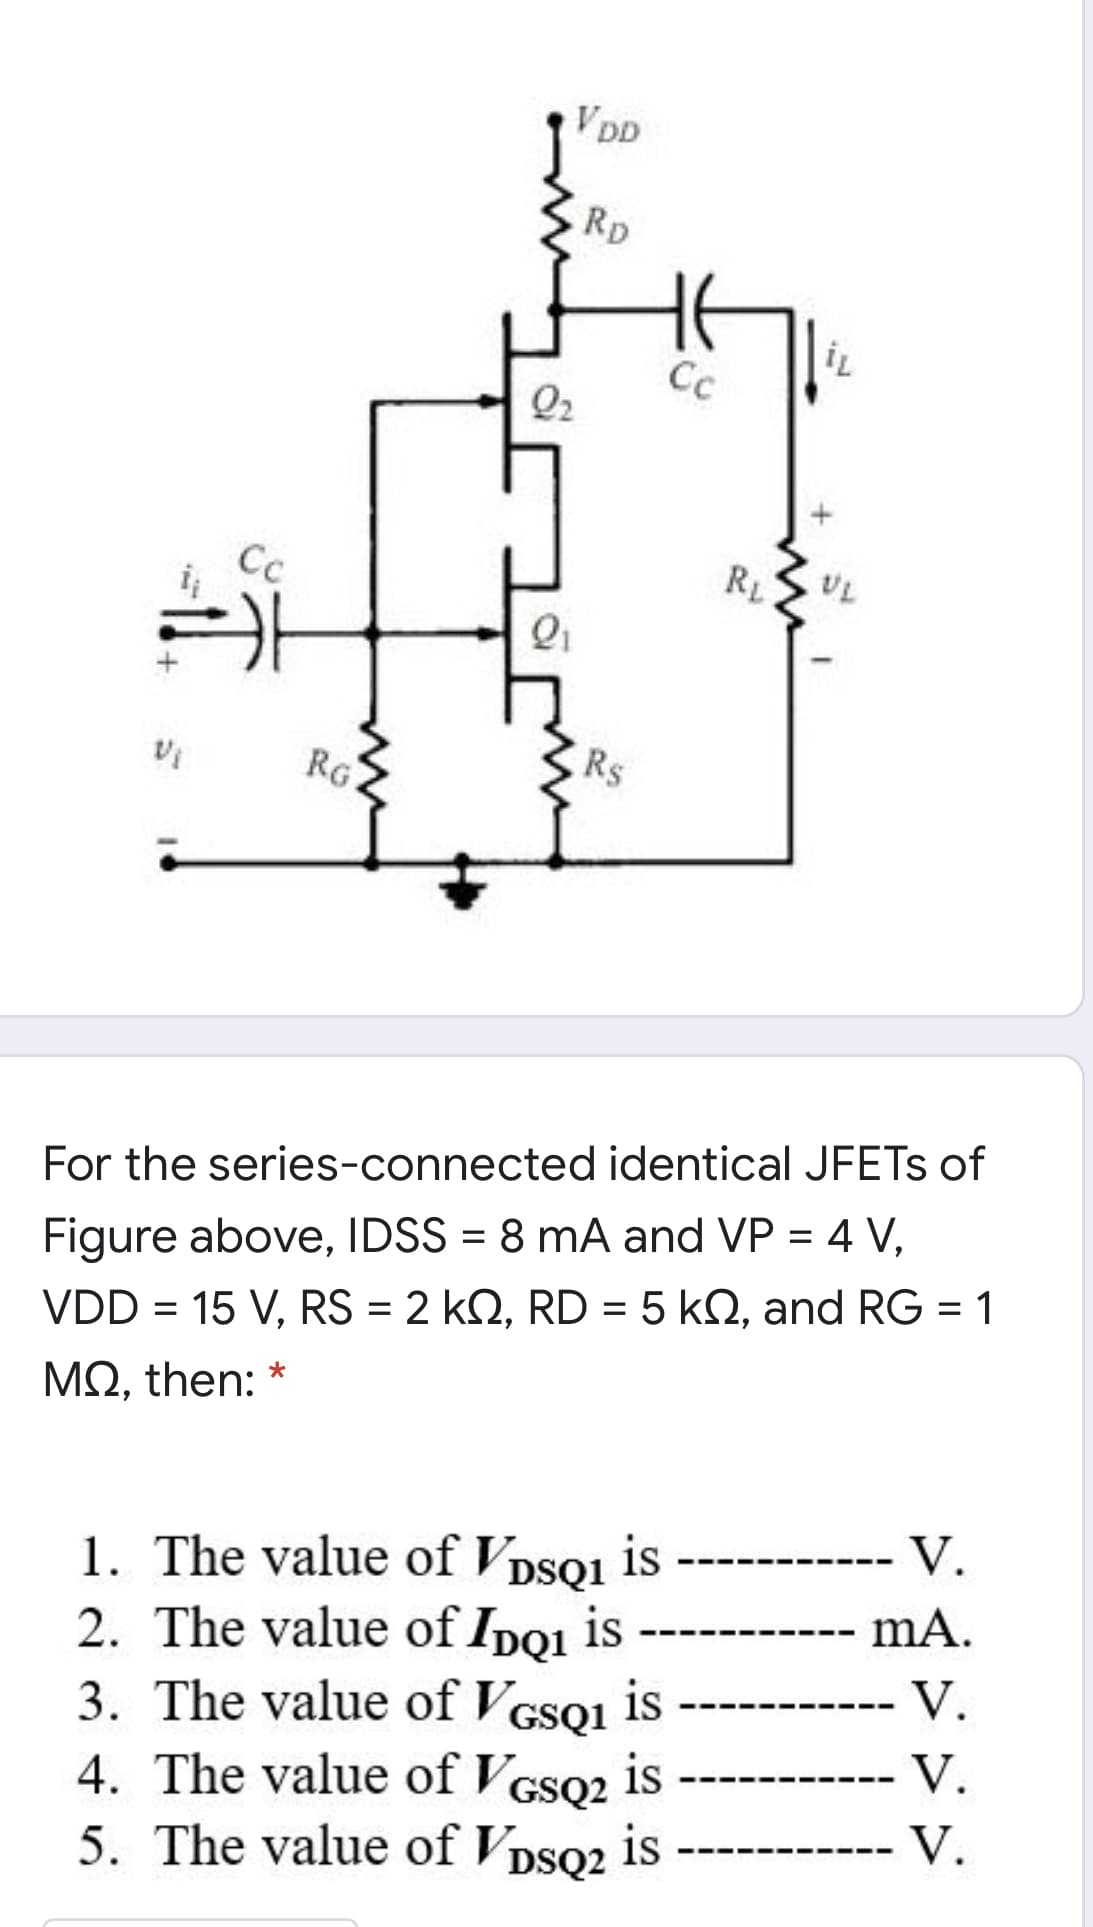 VDD
Rp
Cc
Q2
Cc
RL
RG
Rs
For the series-connected identical JFETS of
Figure above, IDSS = 8 mA and VP = 4 V,
VDD = 15 V, RS = 2 kQ, RD = 5 k2, and RG = 1
ΜΩ, then: *
-- V.
1. The value of Vpsoi is
2. The value of Ipoı is
is
mA.
-- V.
3. The value of VGSQ1
4. The value of Vcso2 is
5. The value of VDSQ2 is
V.
--
V.
--
